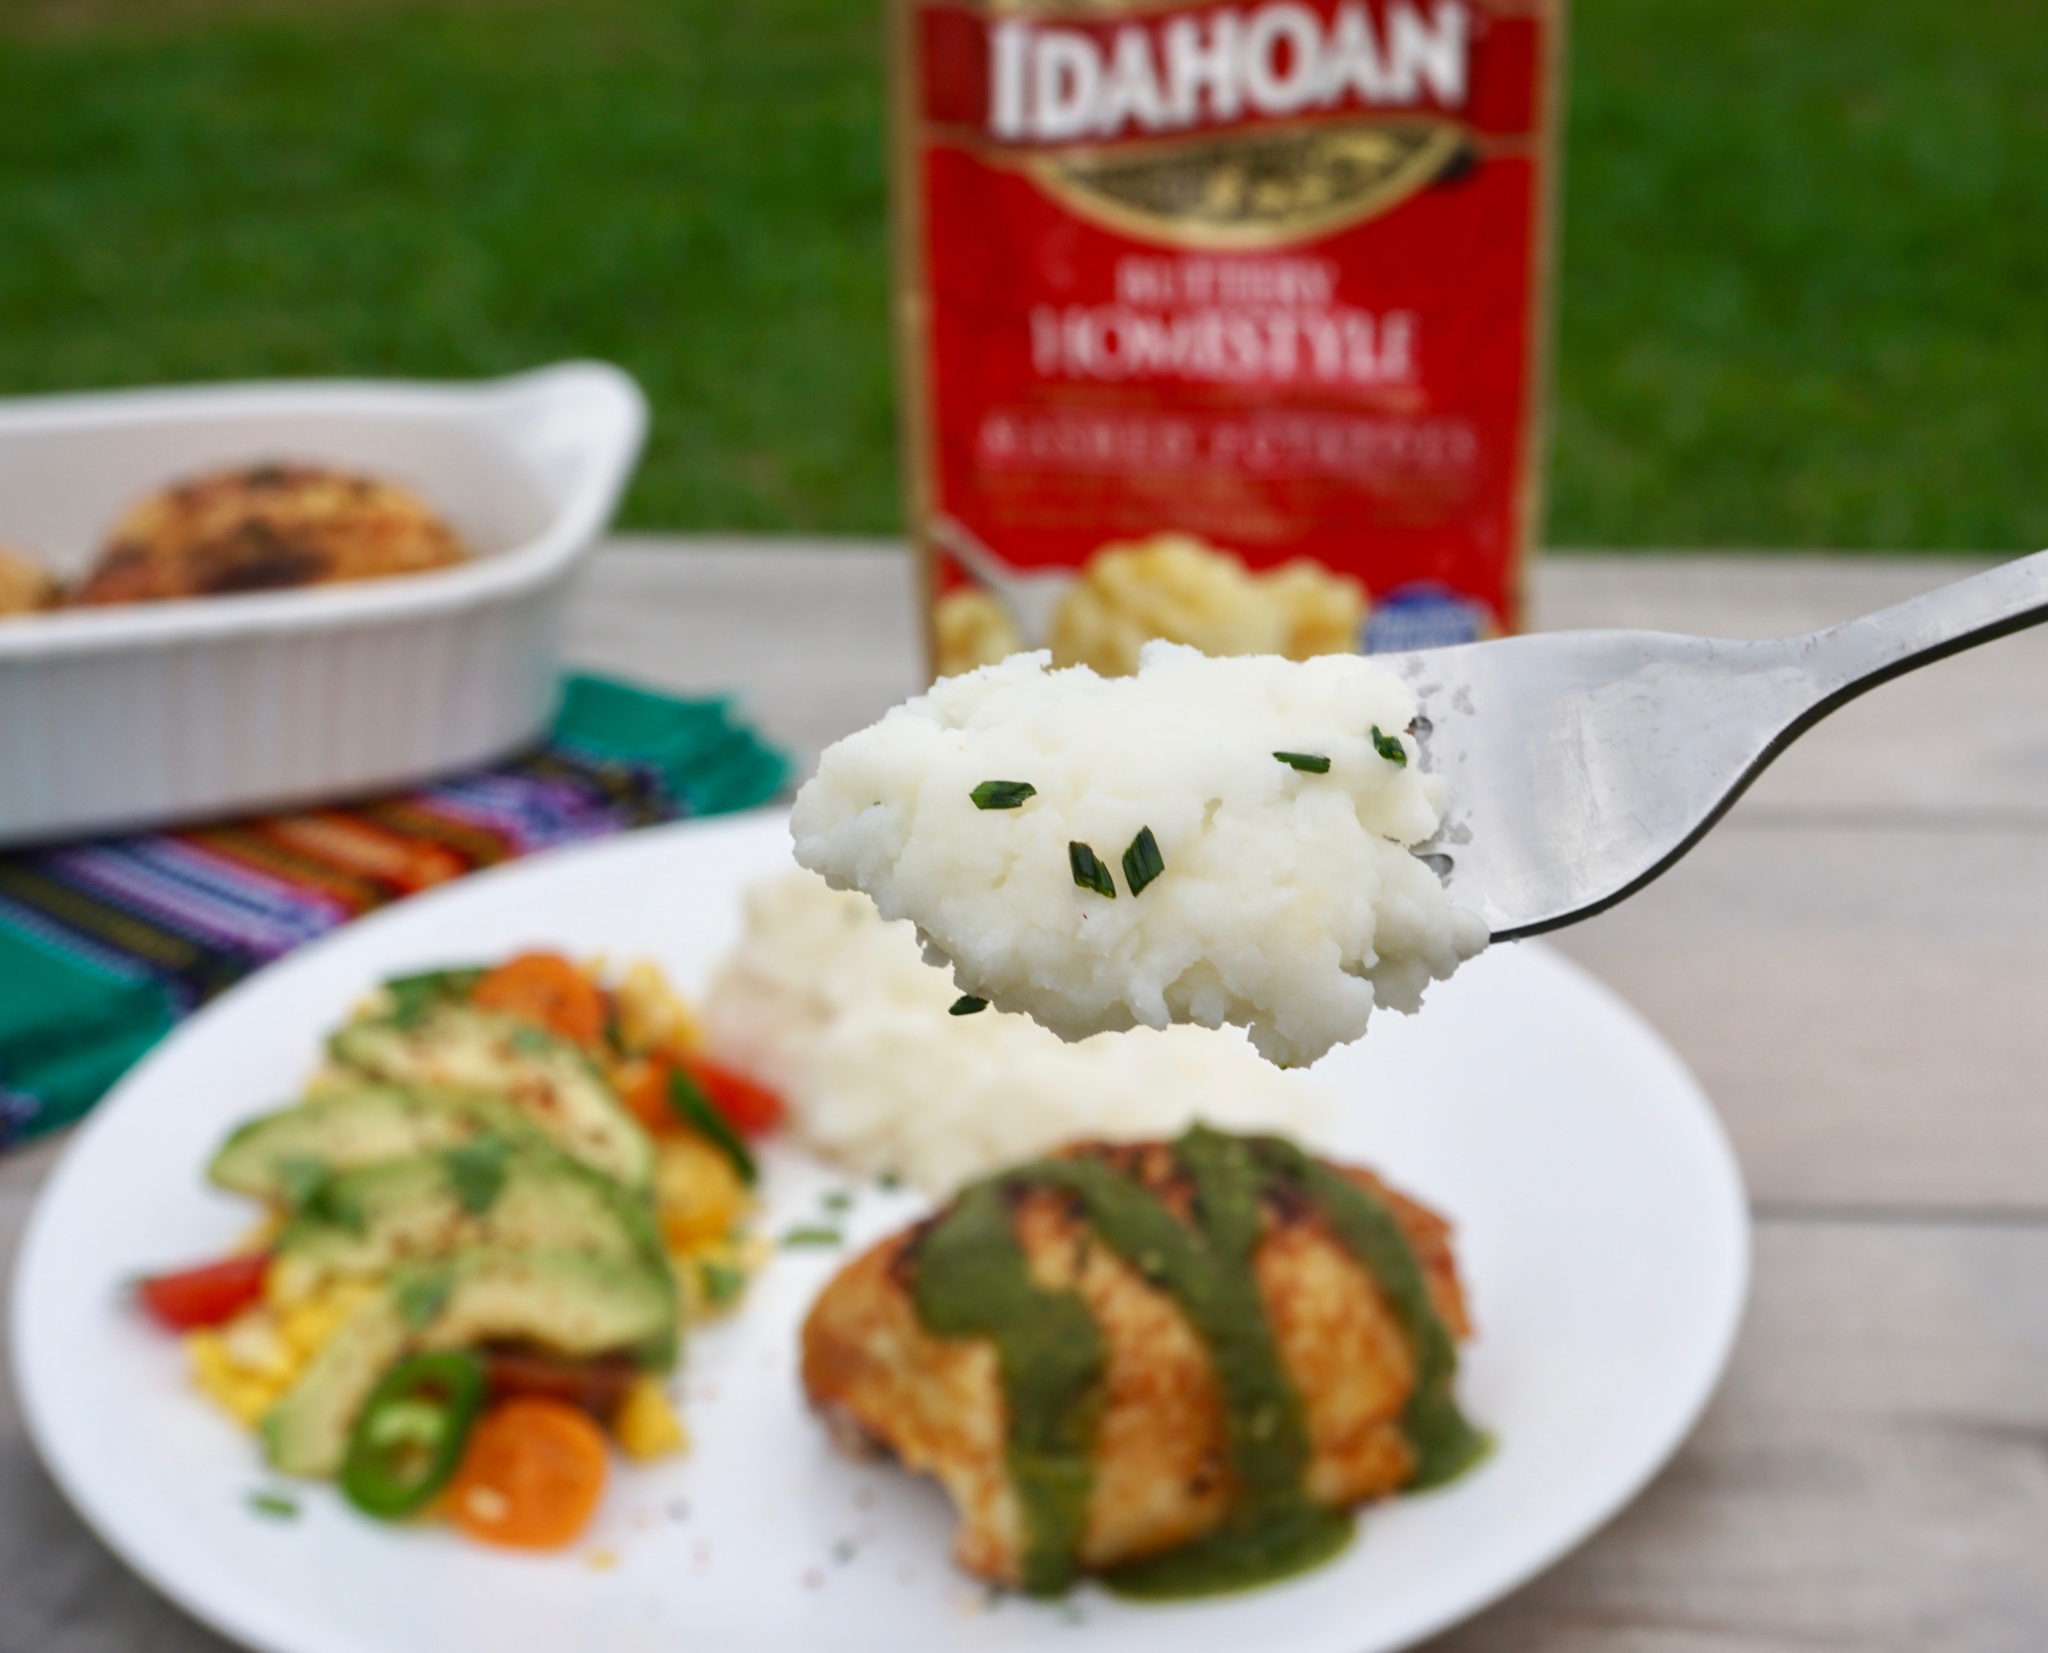 Easy Dinner With Idahoan Mashed Potatoes